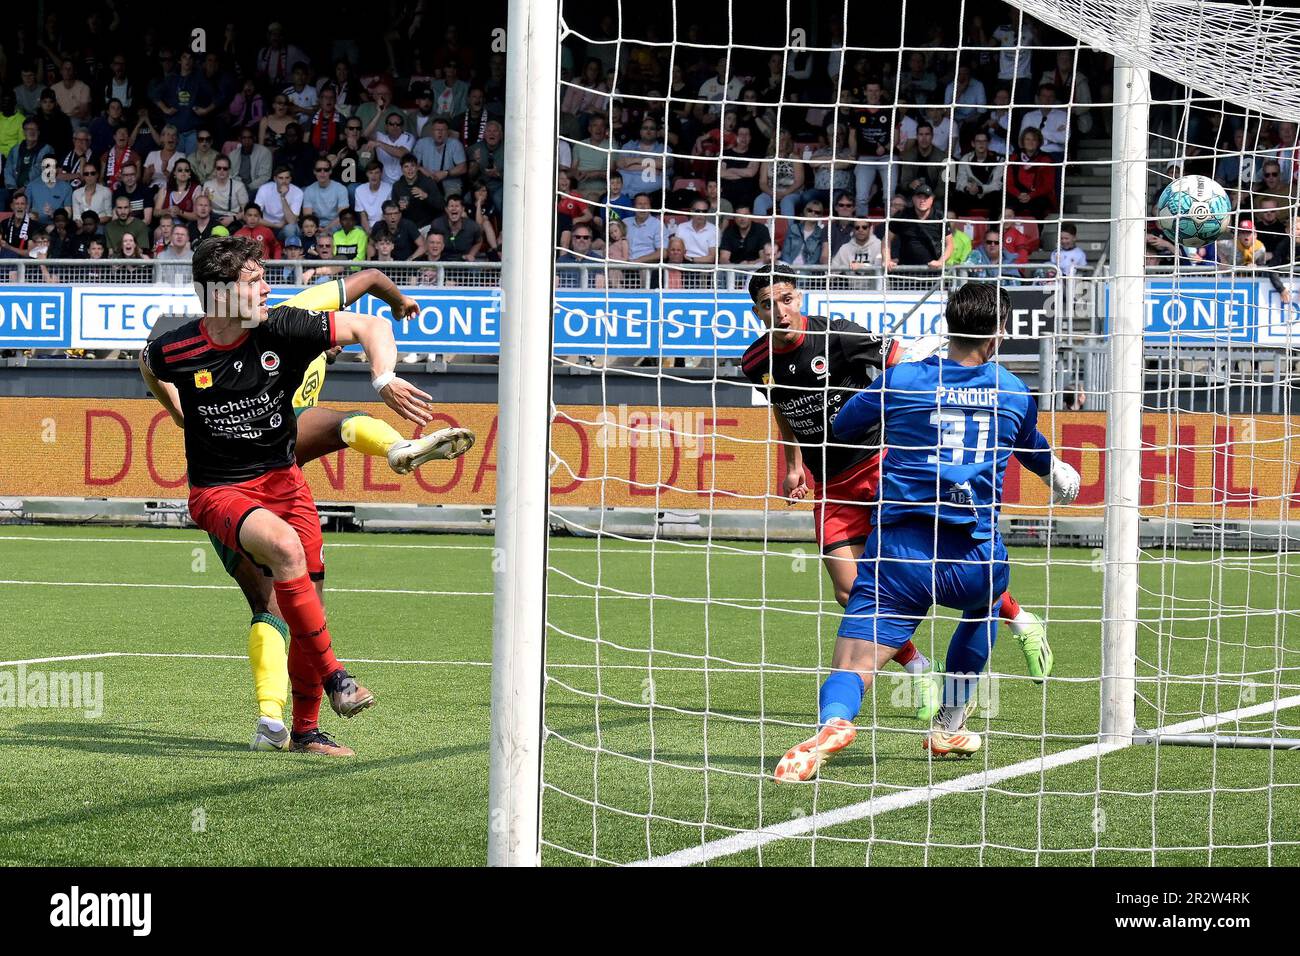 ROTTERDAM - Kik Pierie of sbv Excelsior scores during the Dutch premier match between sbv and Fortuna Sittard at Van Donge & De Roo Stadium on May 21, 2023 in